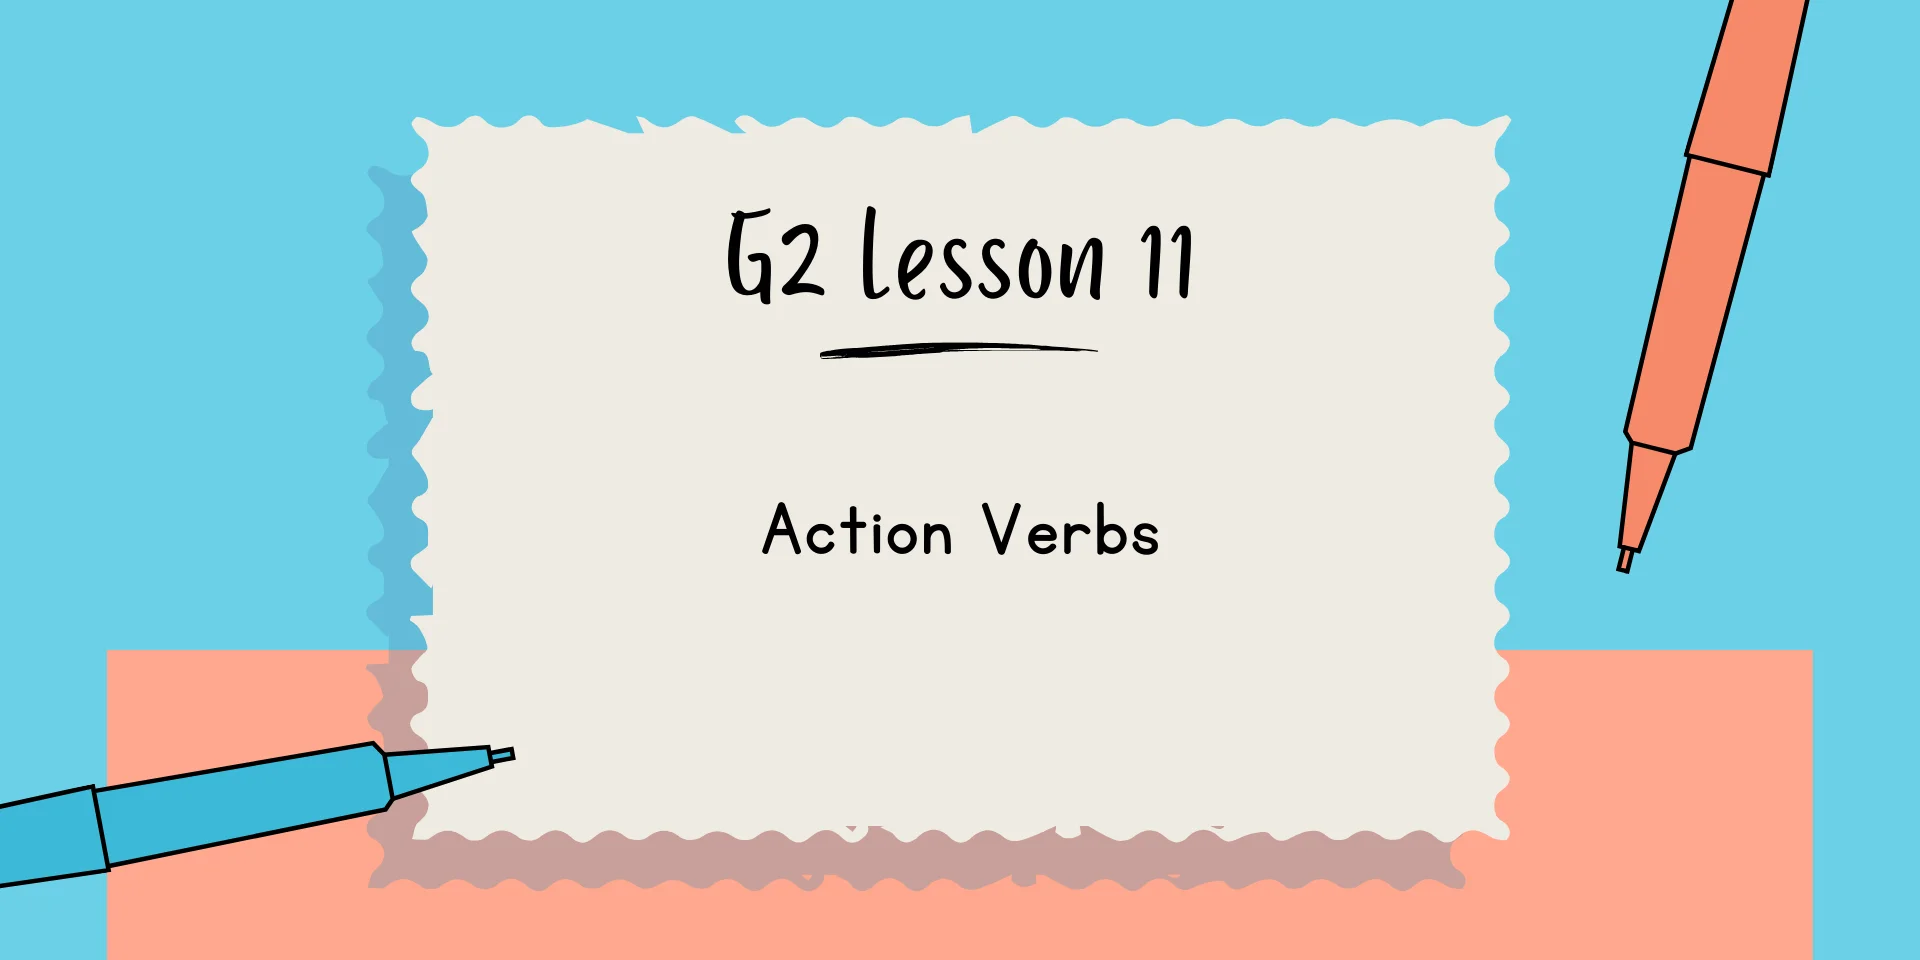 G2 Lesson 11 Action Verbs